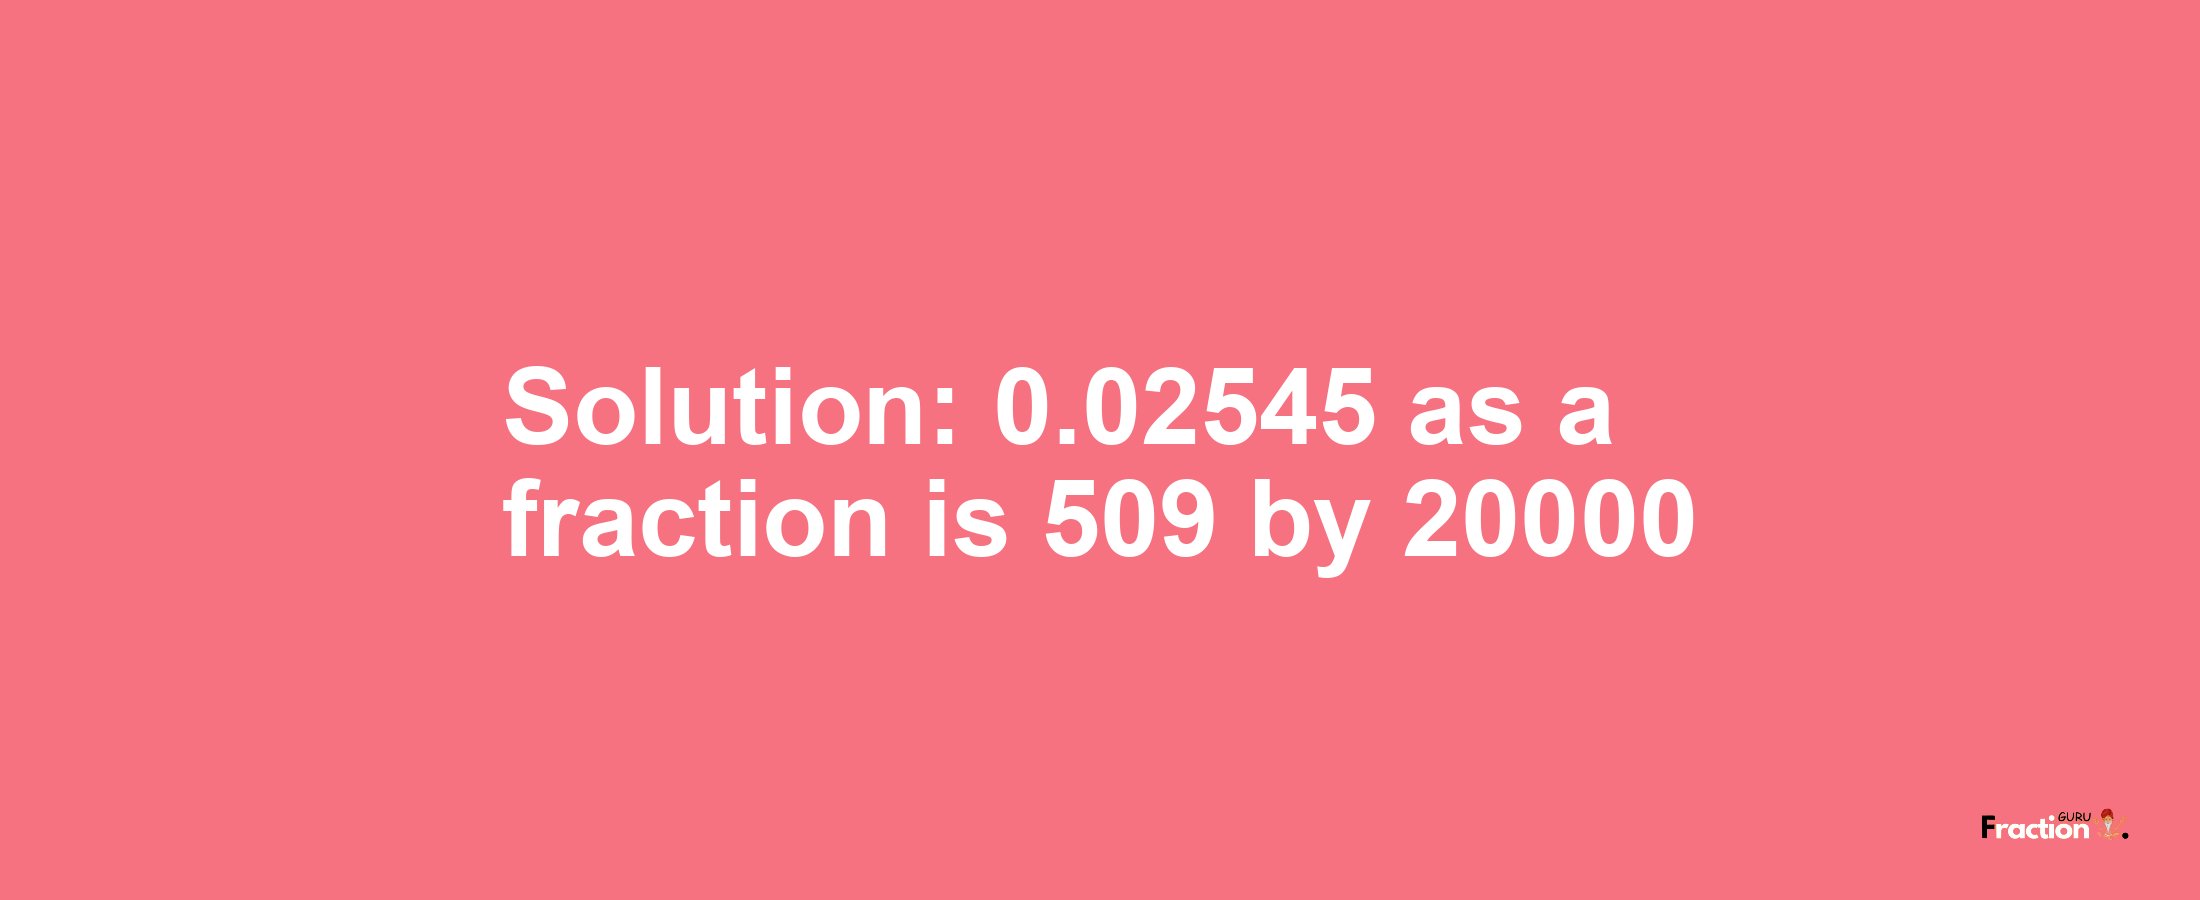 Solution:0.02545 as a fraction is 509/20000